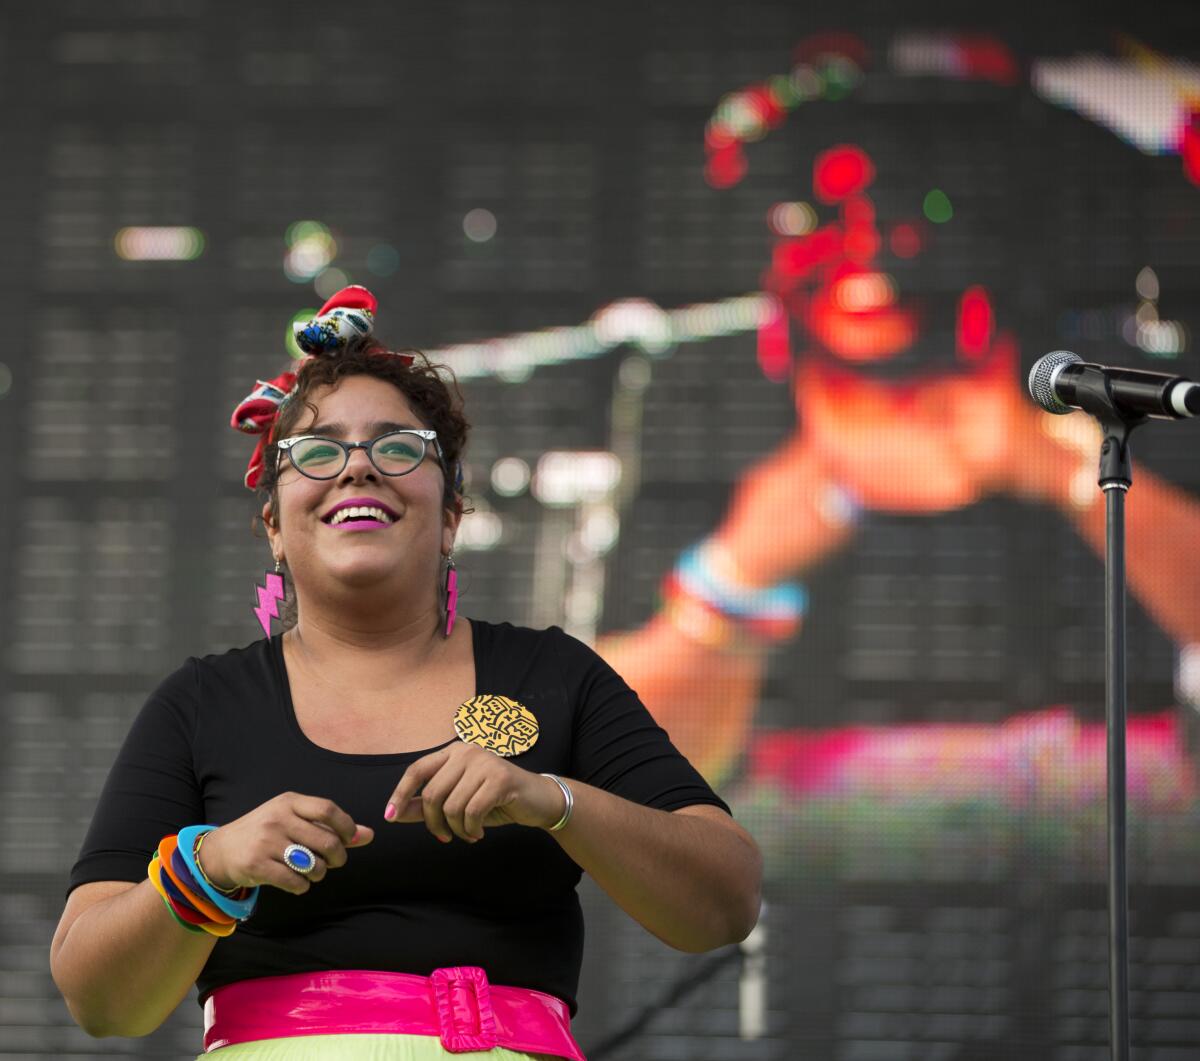 A smiling woman in glasses wears colorful dangling earrings, bangles and a pink belt.